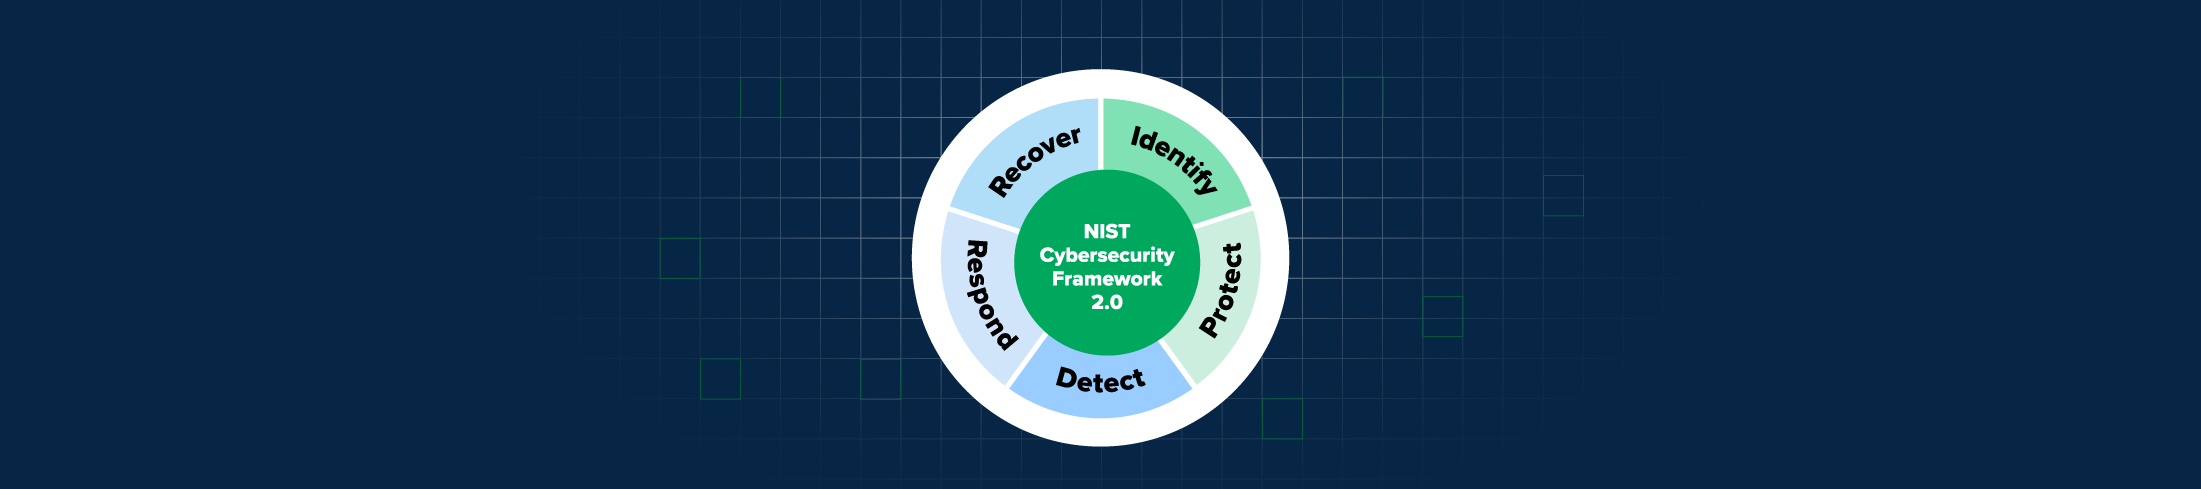 Get your organization ready for the new cybersecurity framework NIST 2.0